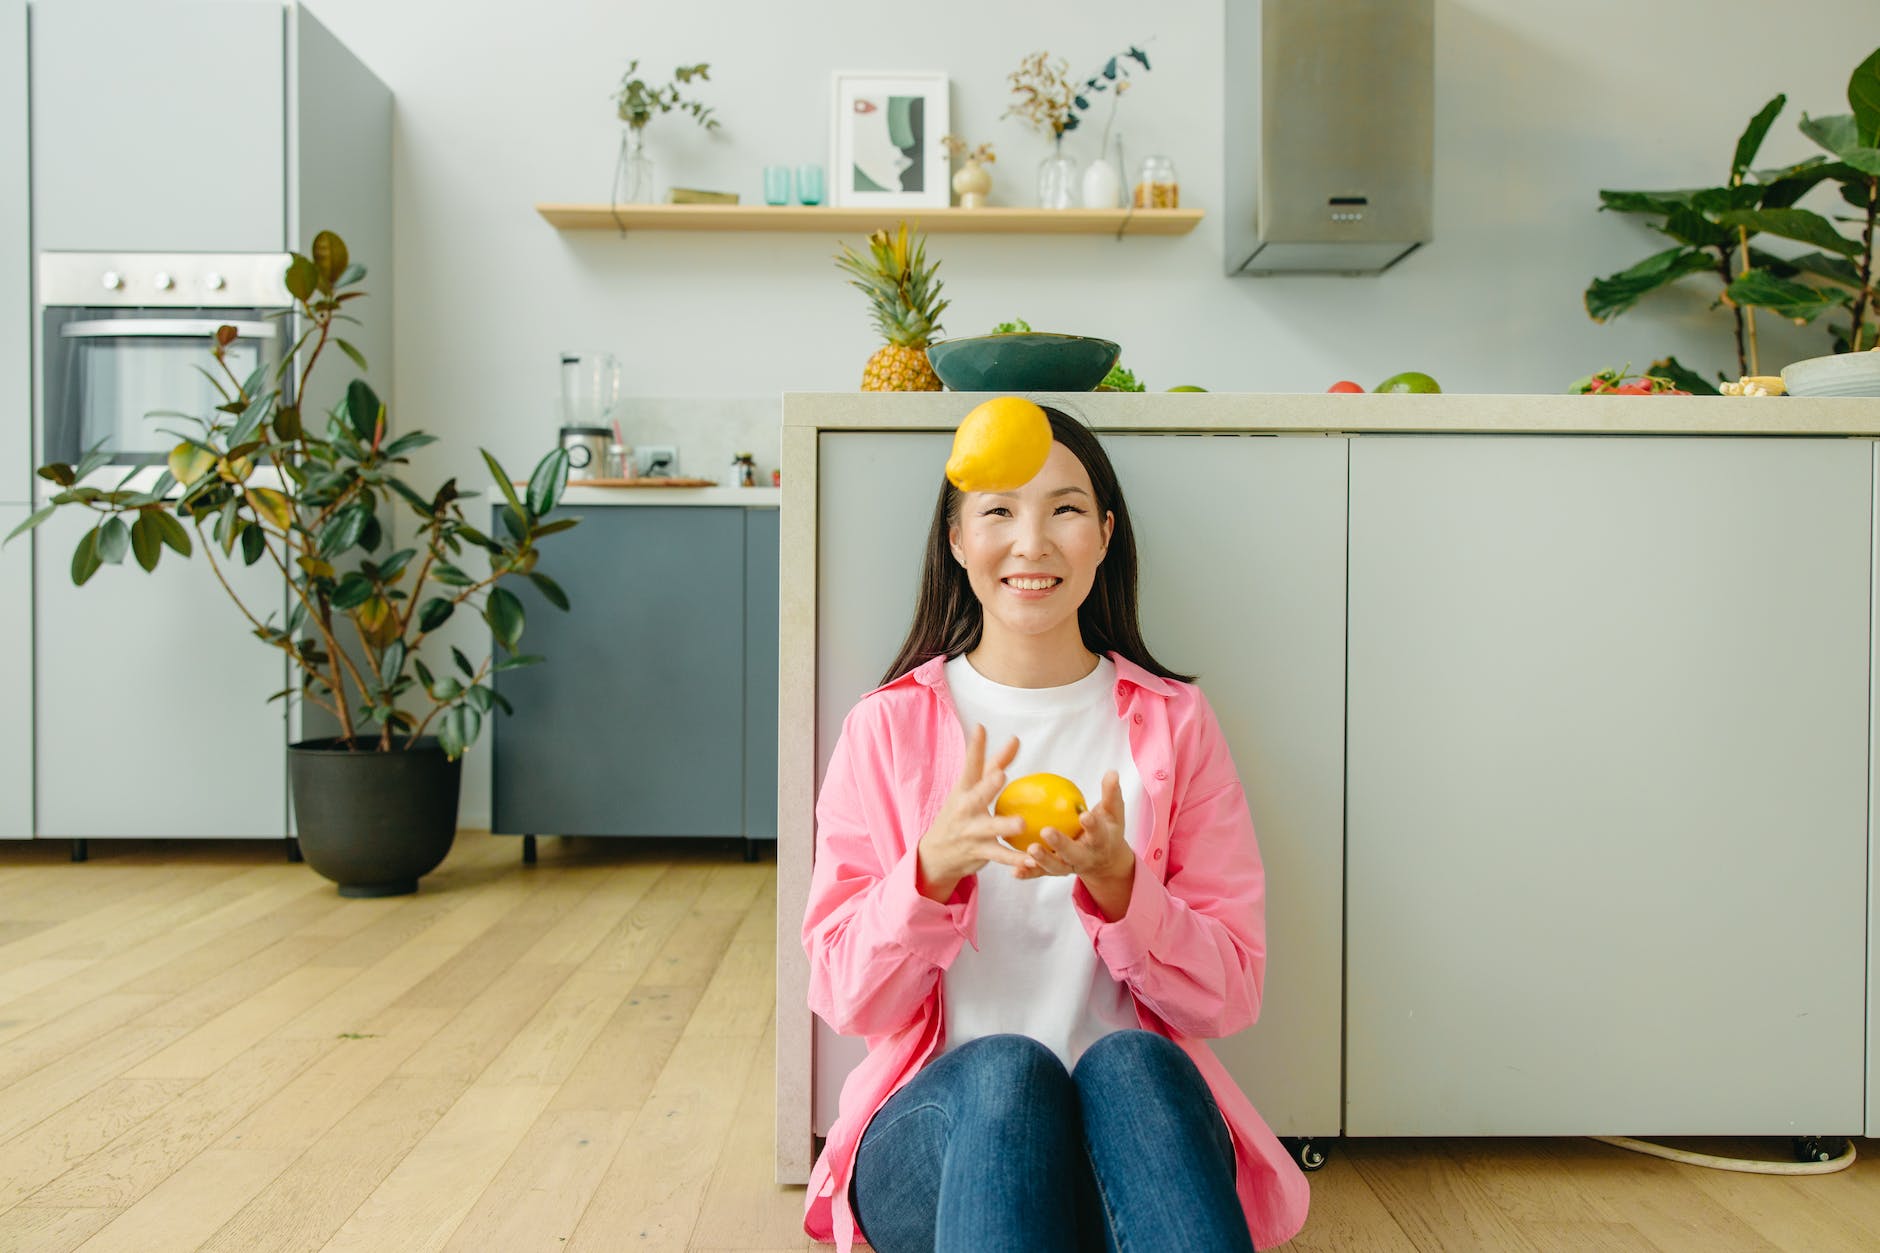 a woman sitting on the floor juggling the lemons she is holding